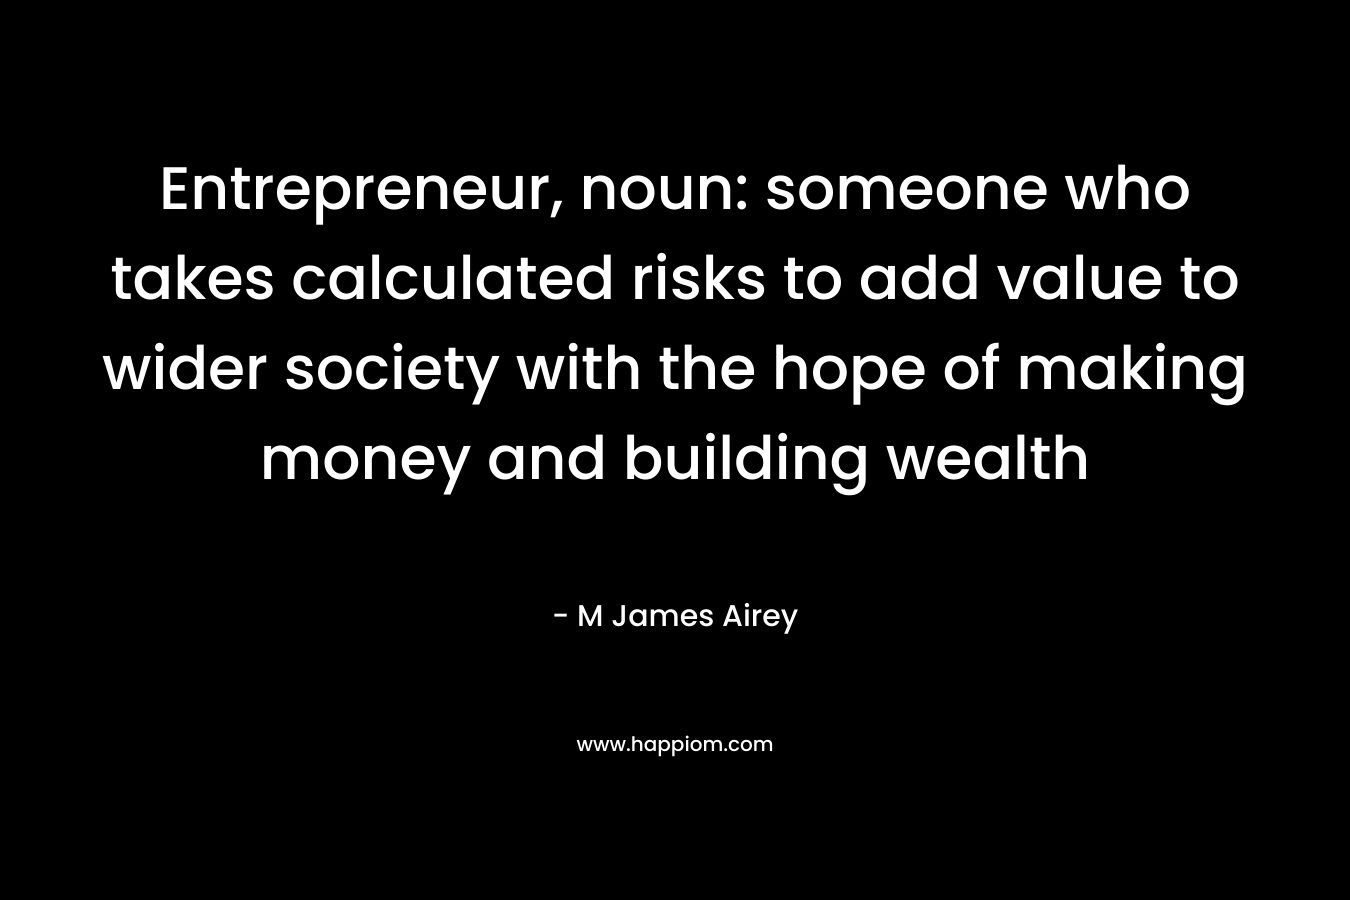 Entrepreneur, noun: someone who takes calculated risks to add value to wider society with the hope of making money and building wealth – M James Airey